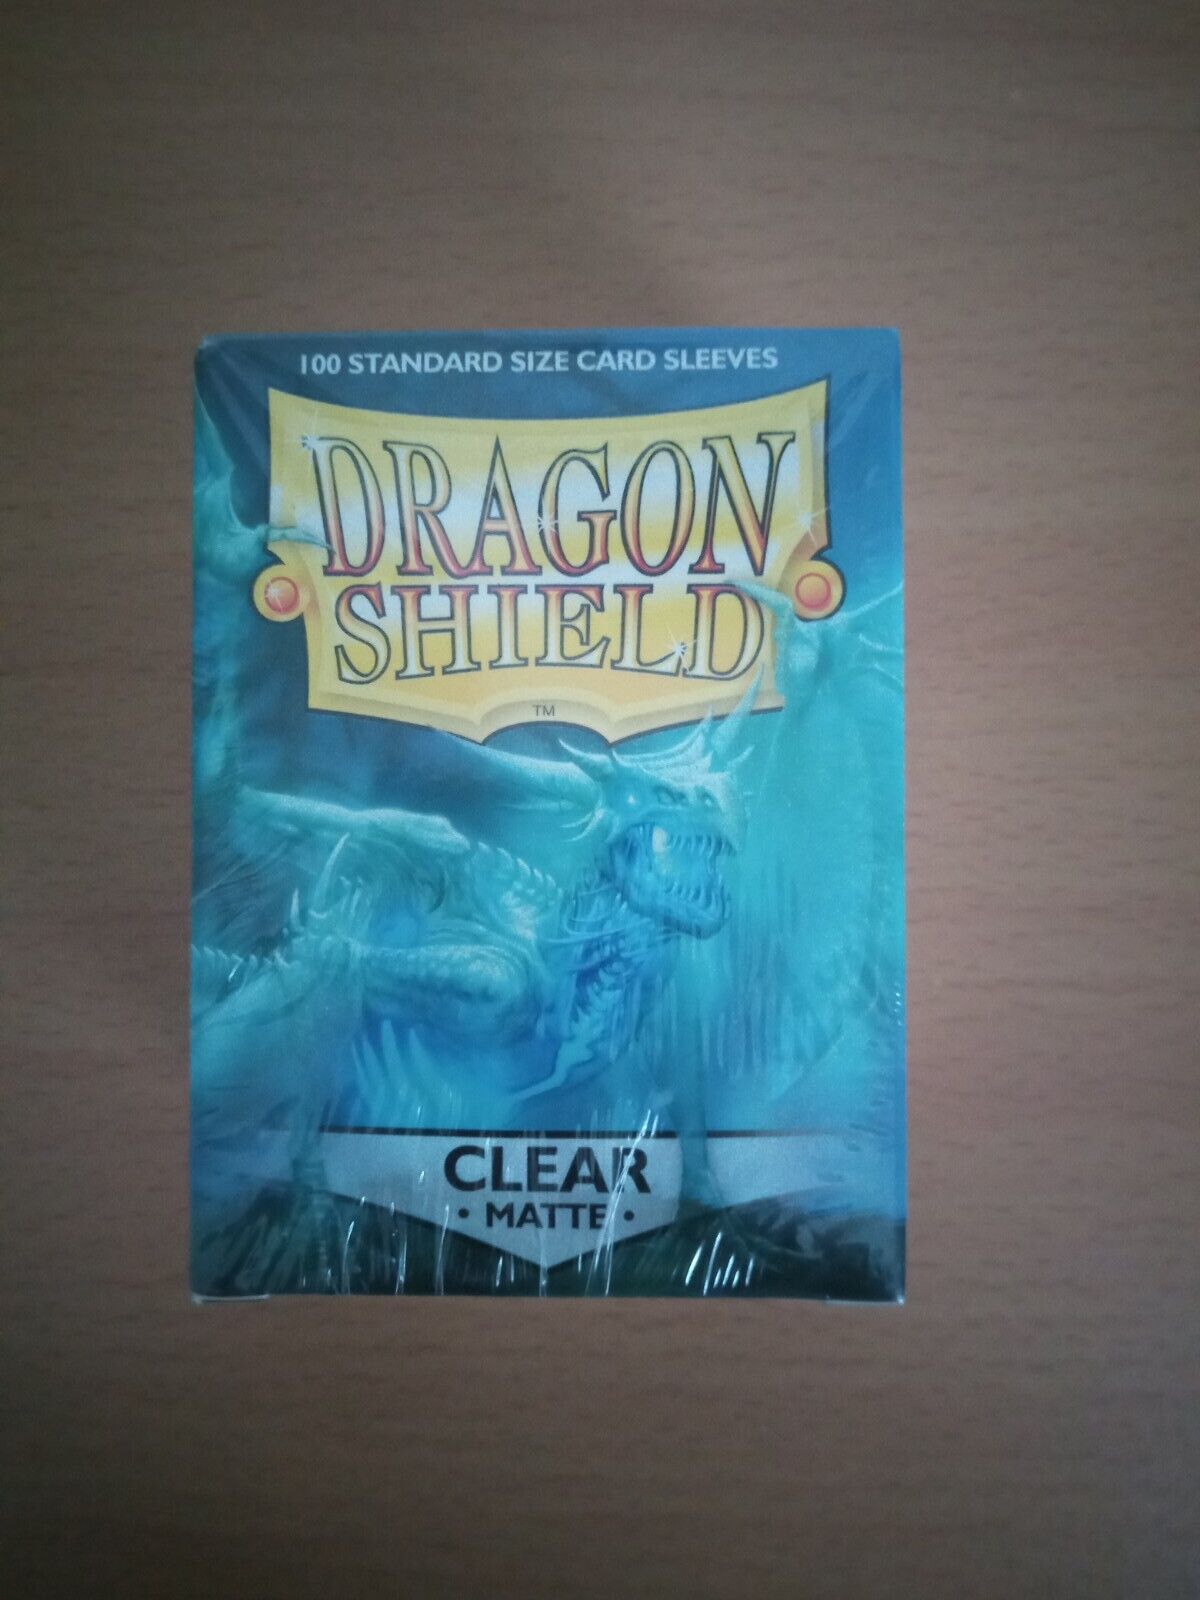 Clear card sleeves By Dragon Shield 100 Standard Size Brand New Sealed 